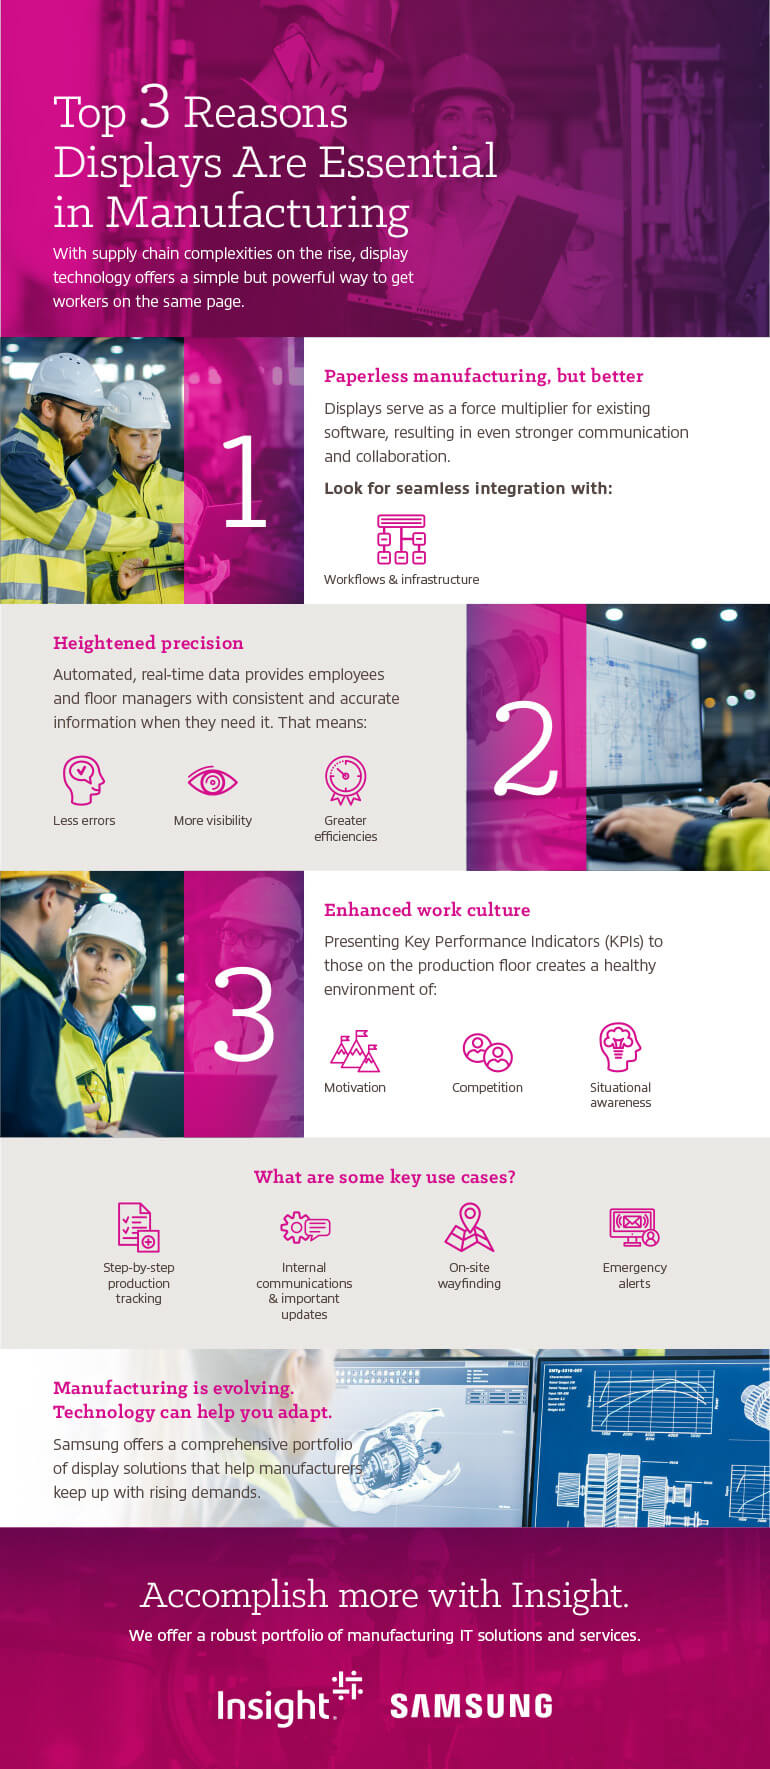 Top 3 Reasons Displays Are Essential in Manufacturing infographic